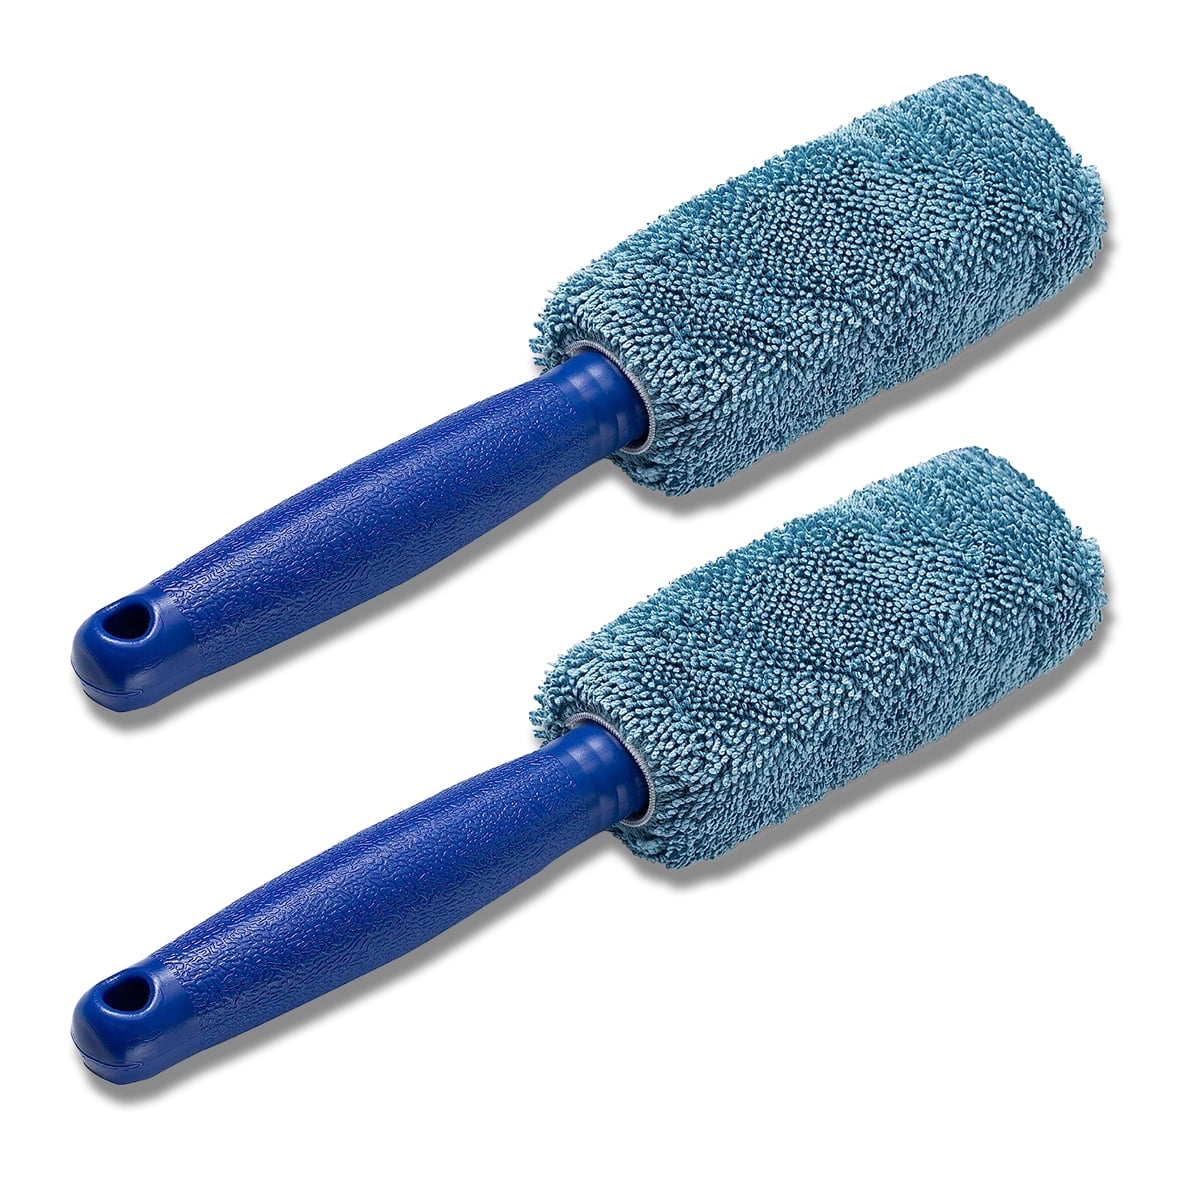 PROPER DETAILING CO. Wheel Brushes for Cleaning Wheels, 2 Pack Premium  Microfiber Brushes, Wheel Barrels, Spoked Rims, Professional Grade Scratch  Free Wheel Brush for Cars, Trucks, Motorcycles